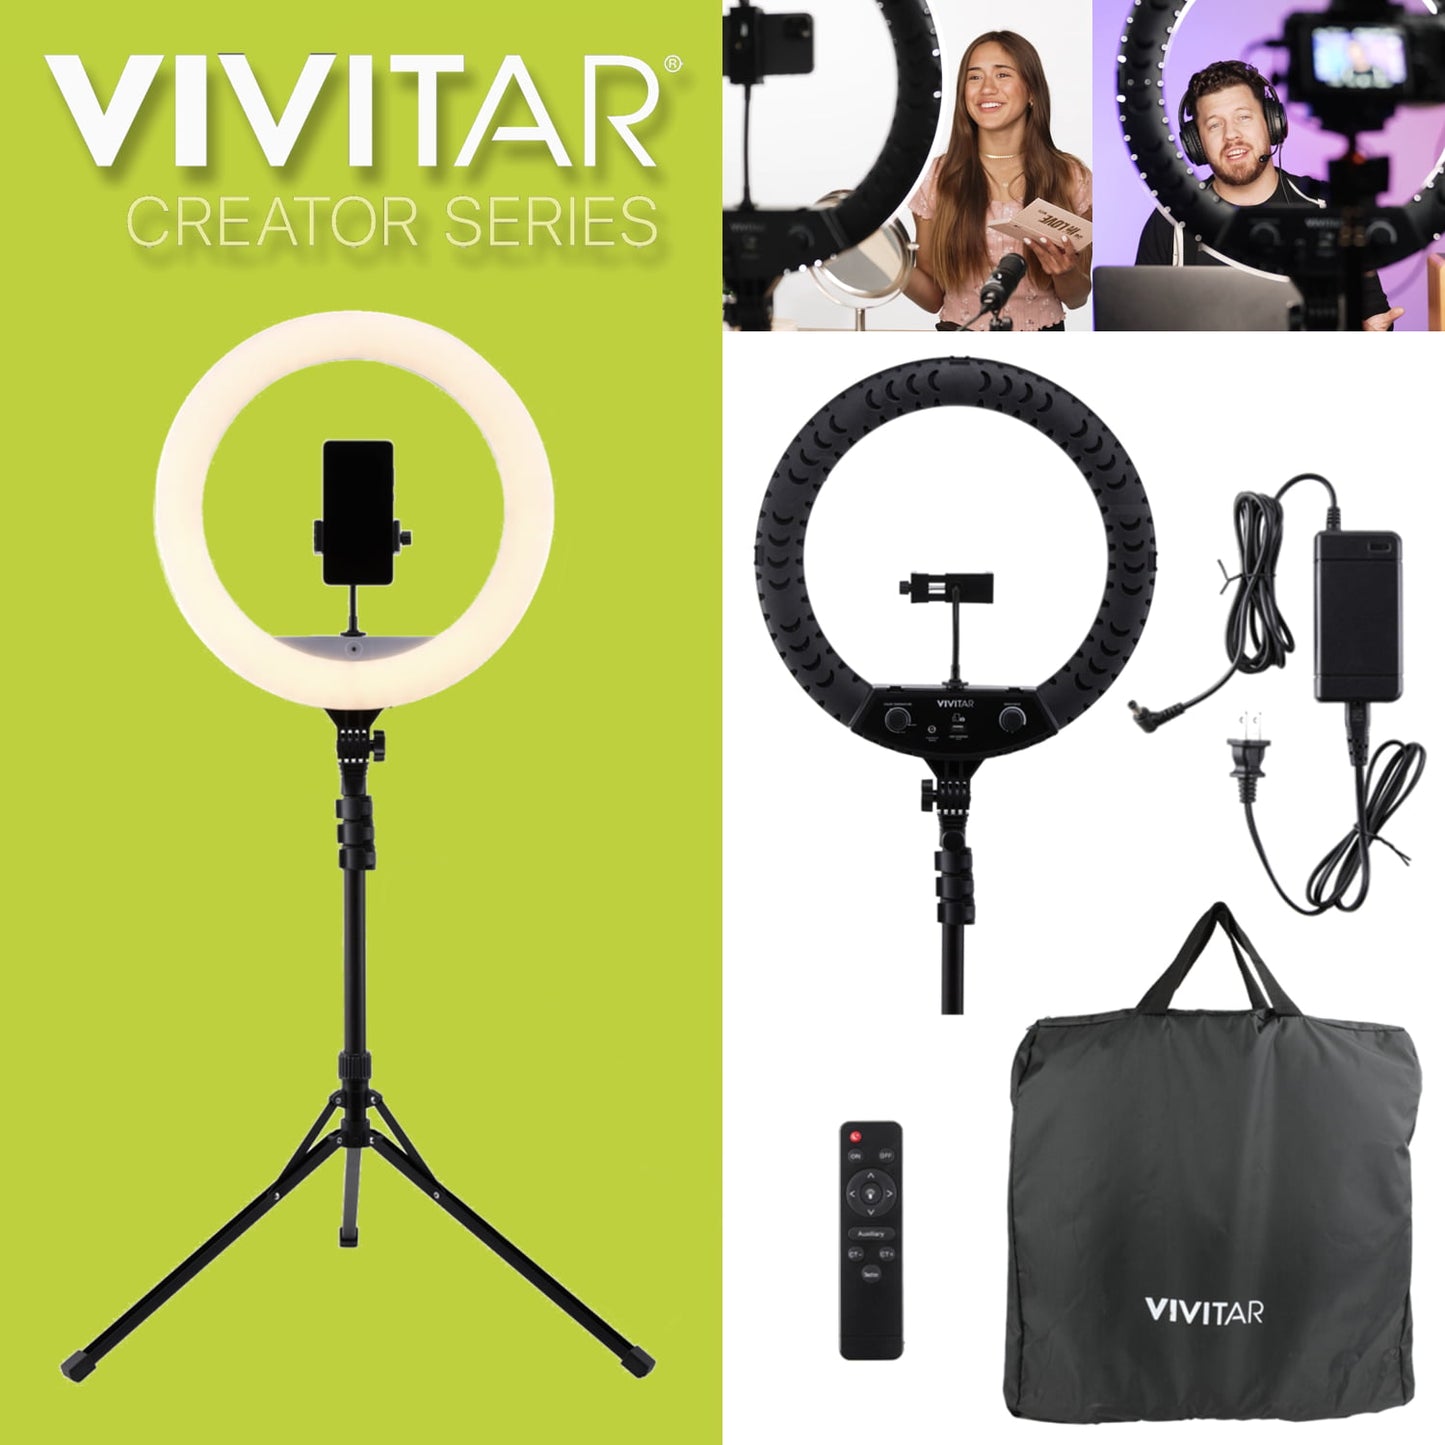 Vivitar 18-Inch LED Ring Light, Adjustable 63-Inch Tripod Stand, with Phone Stand and Wireless Remote for Selfies